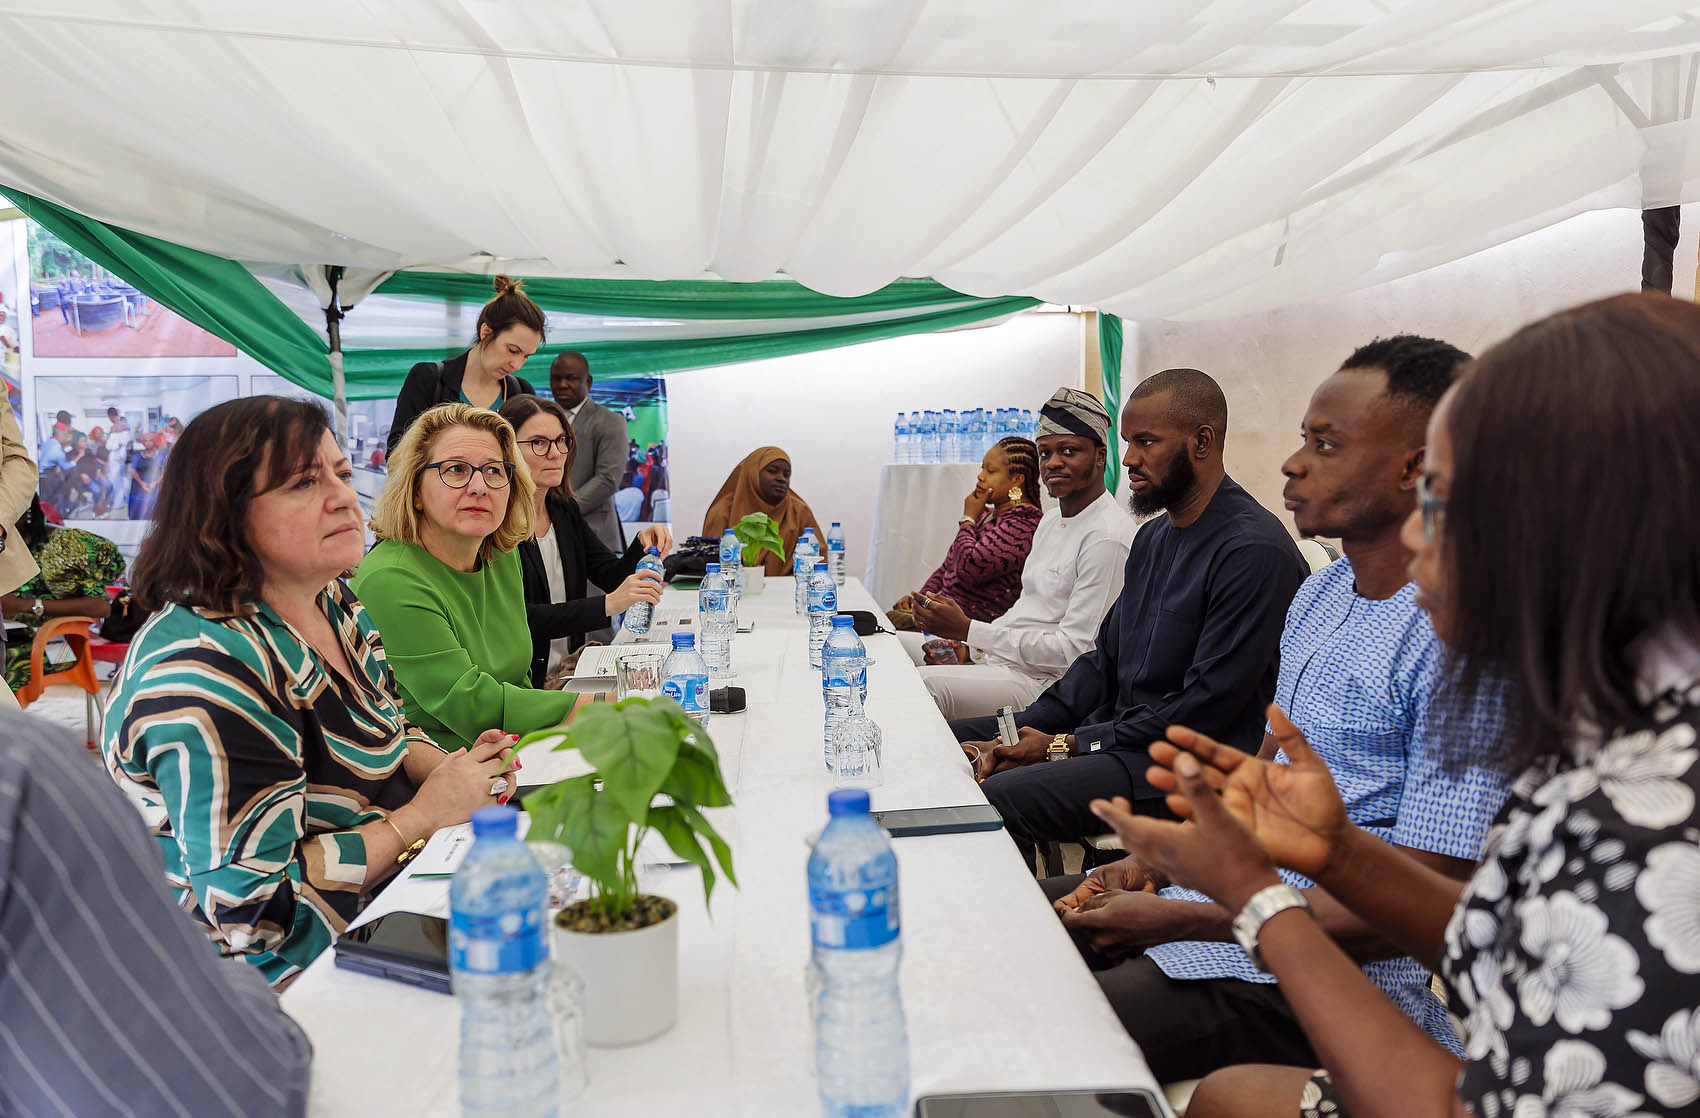 Development Minister Svenja Schulze and Parliamentary State Secretary Dr Bärbel Kofler in conversation with visitors to the newly opened Migration Resource Centre in Nyanya, Nigeria